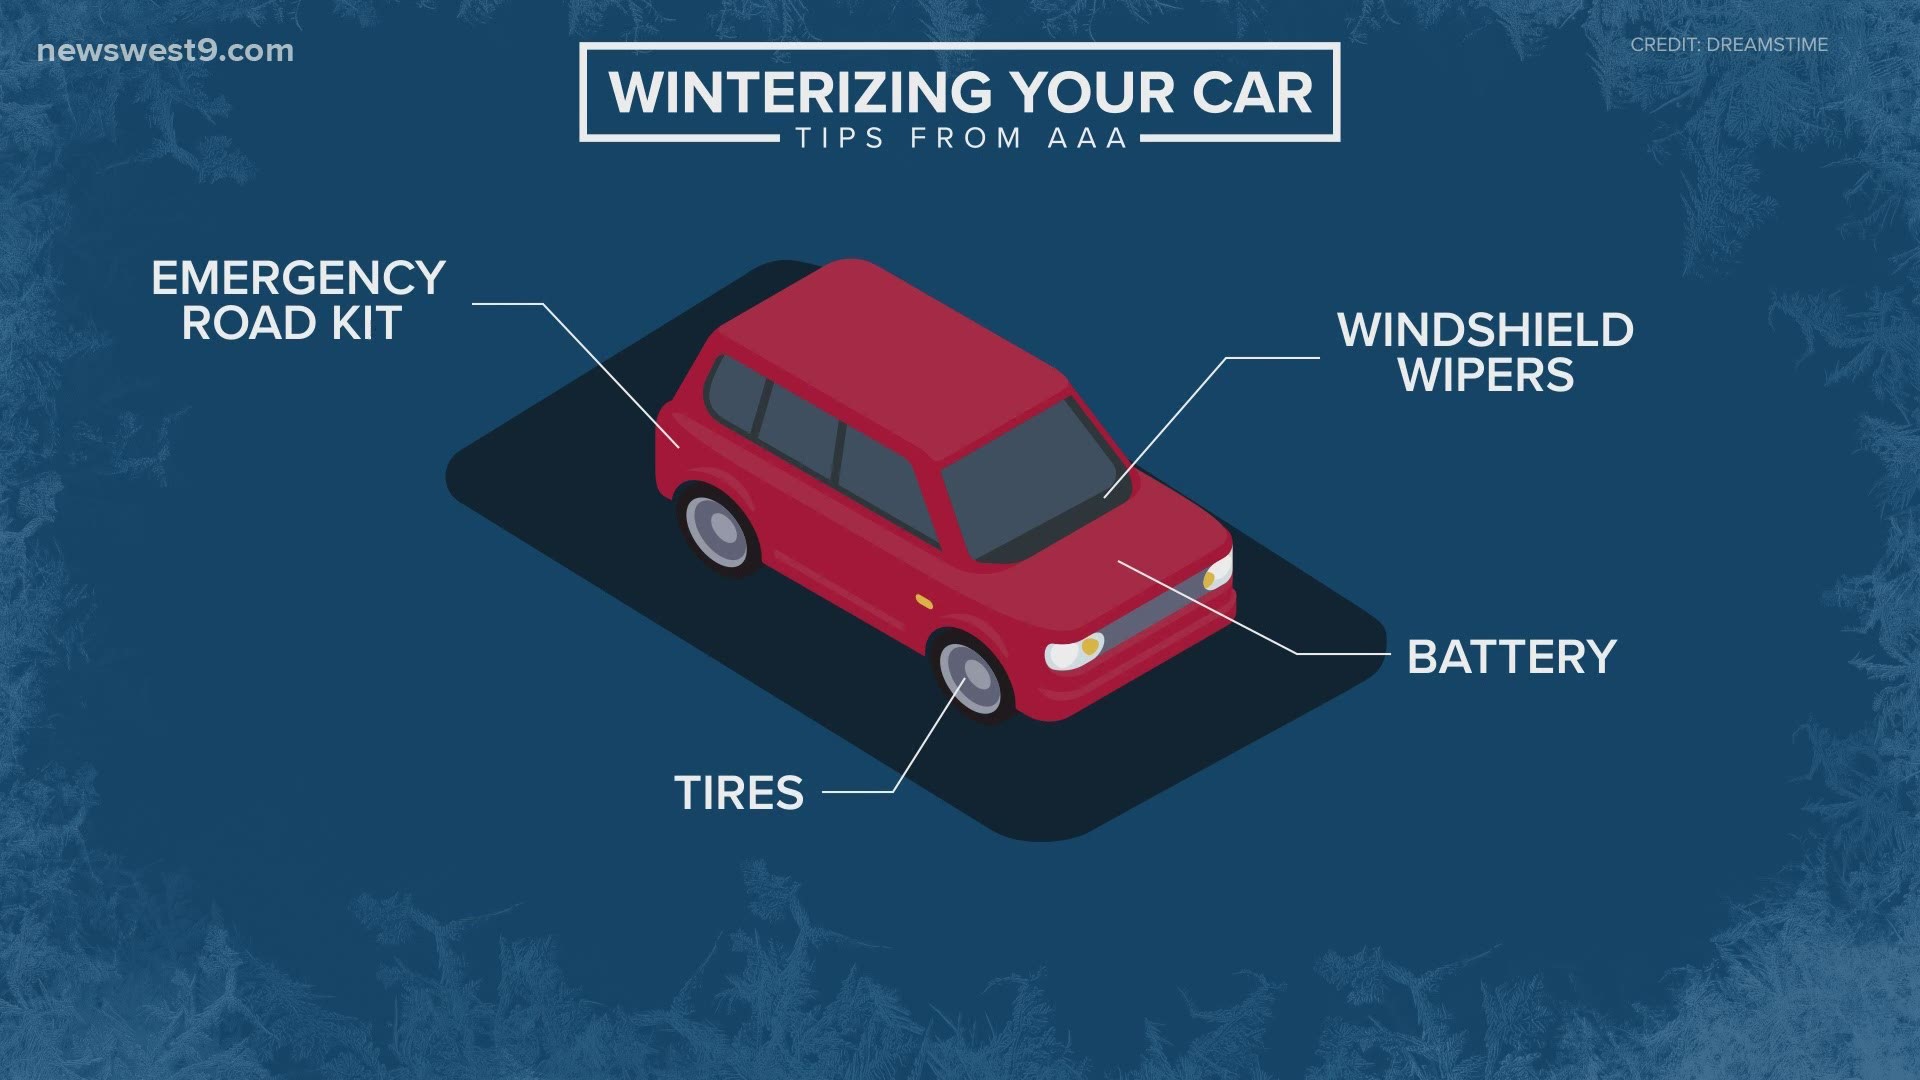 Snowfall often means icy and dangerous roads-here are some tips to stay safe.